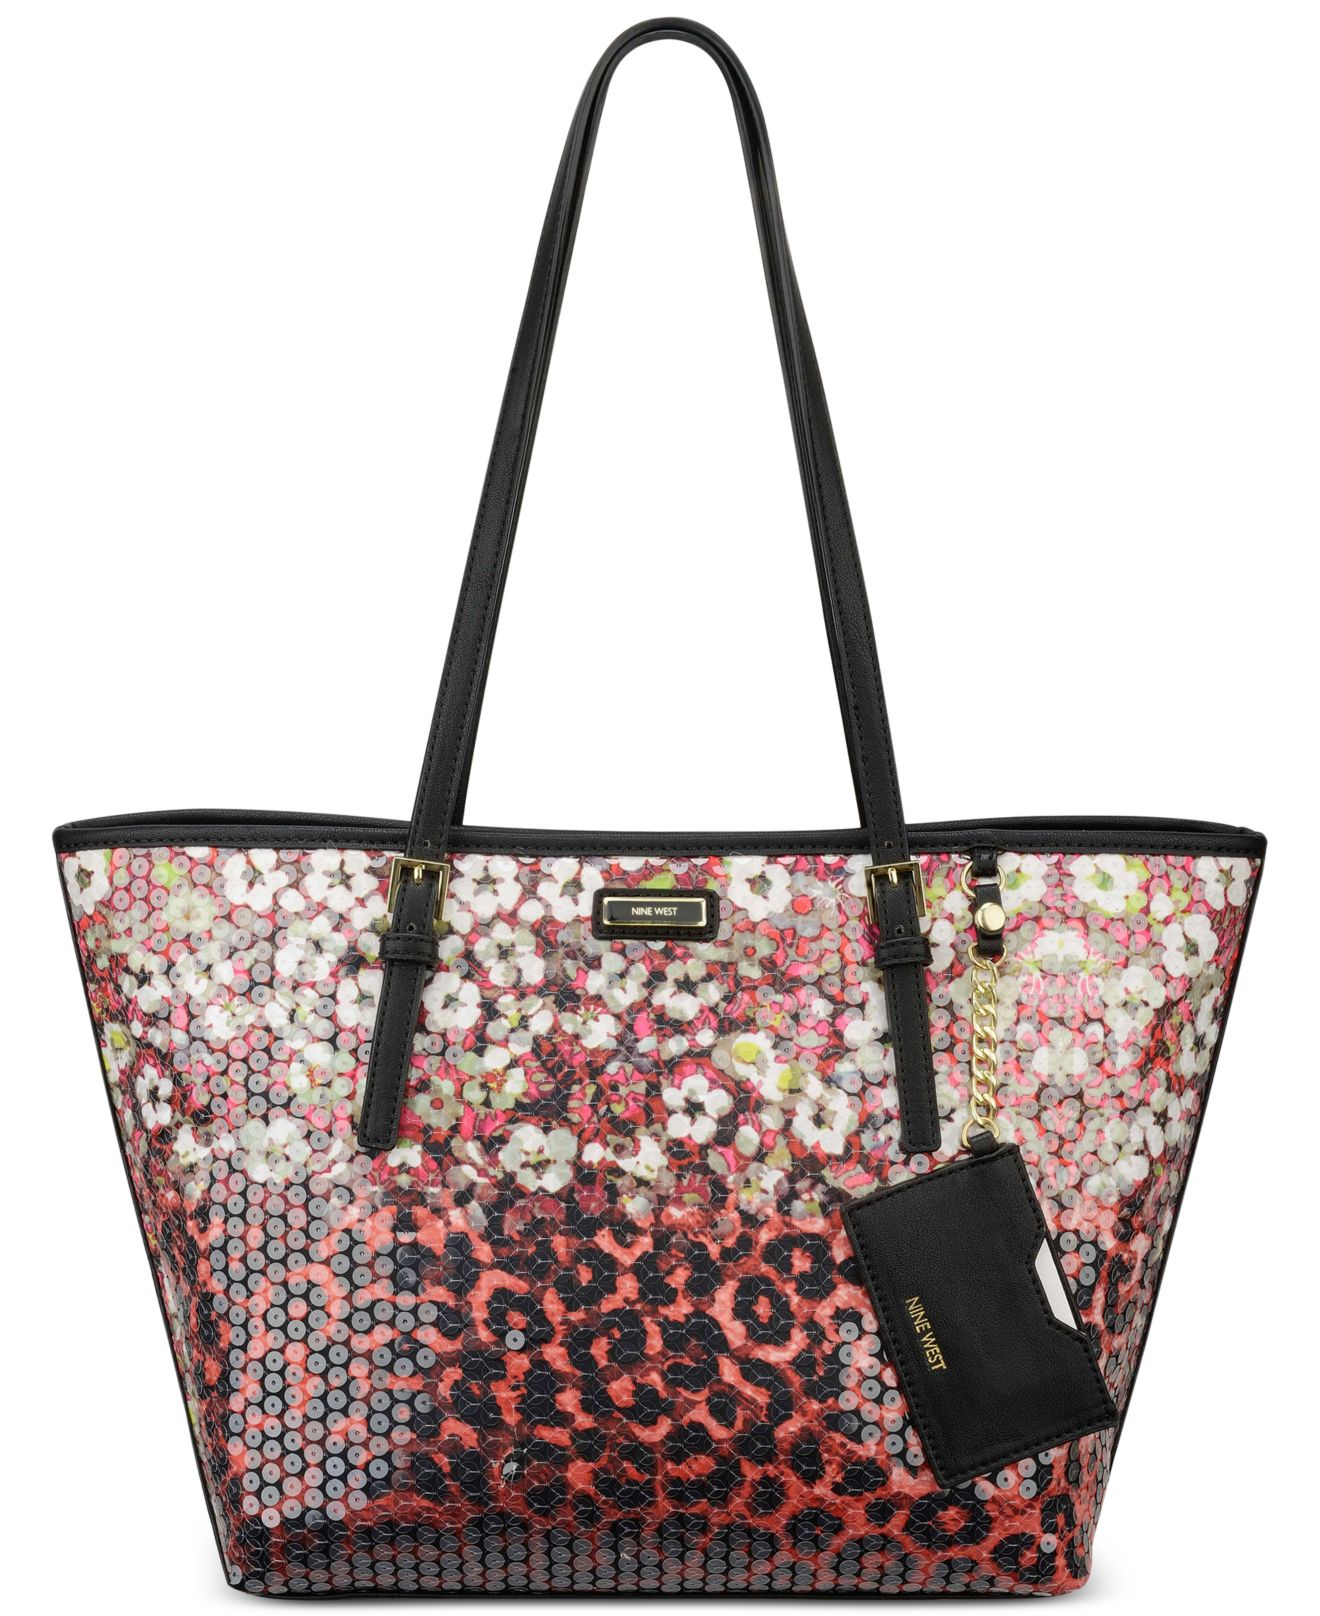 Lyst - Nine west Ava Tote in Red